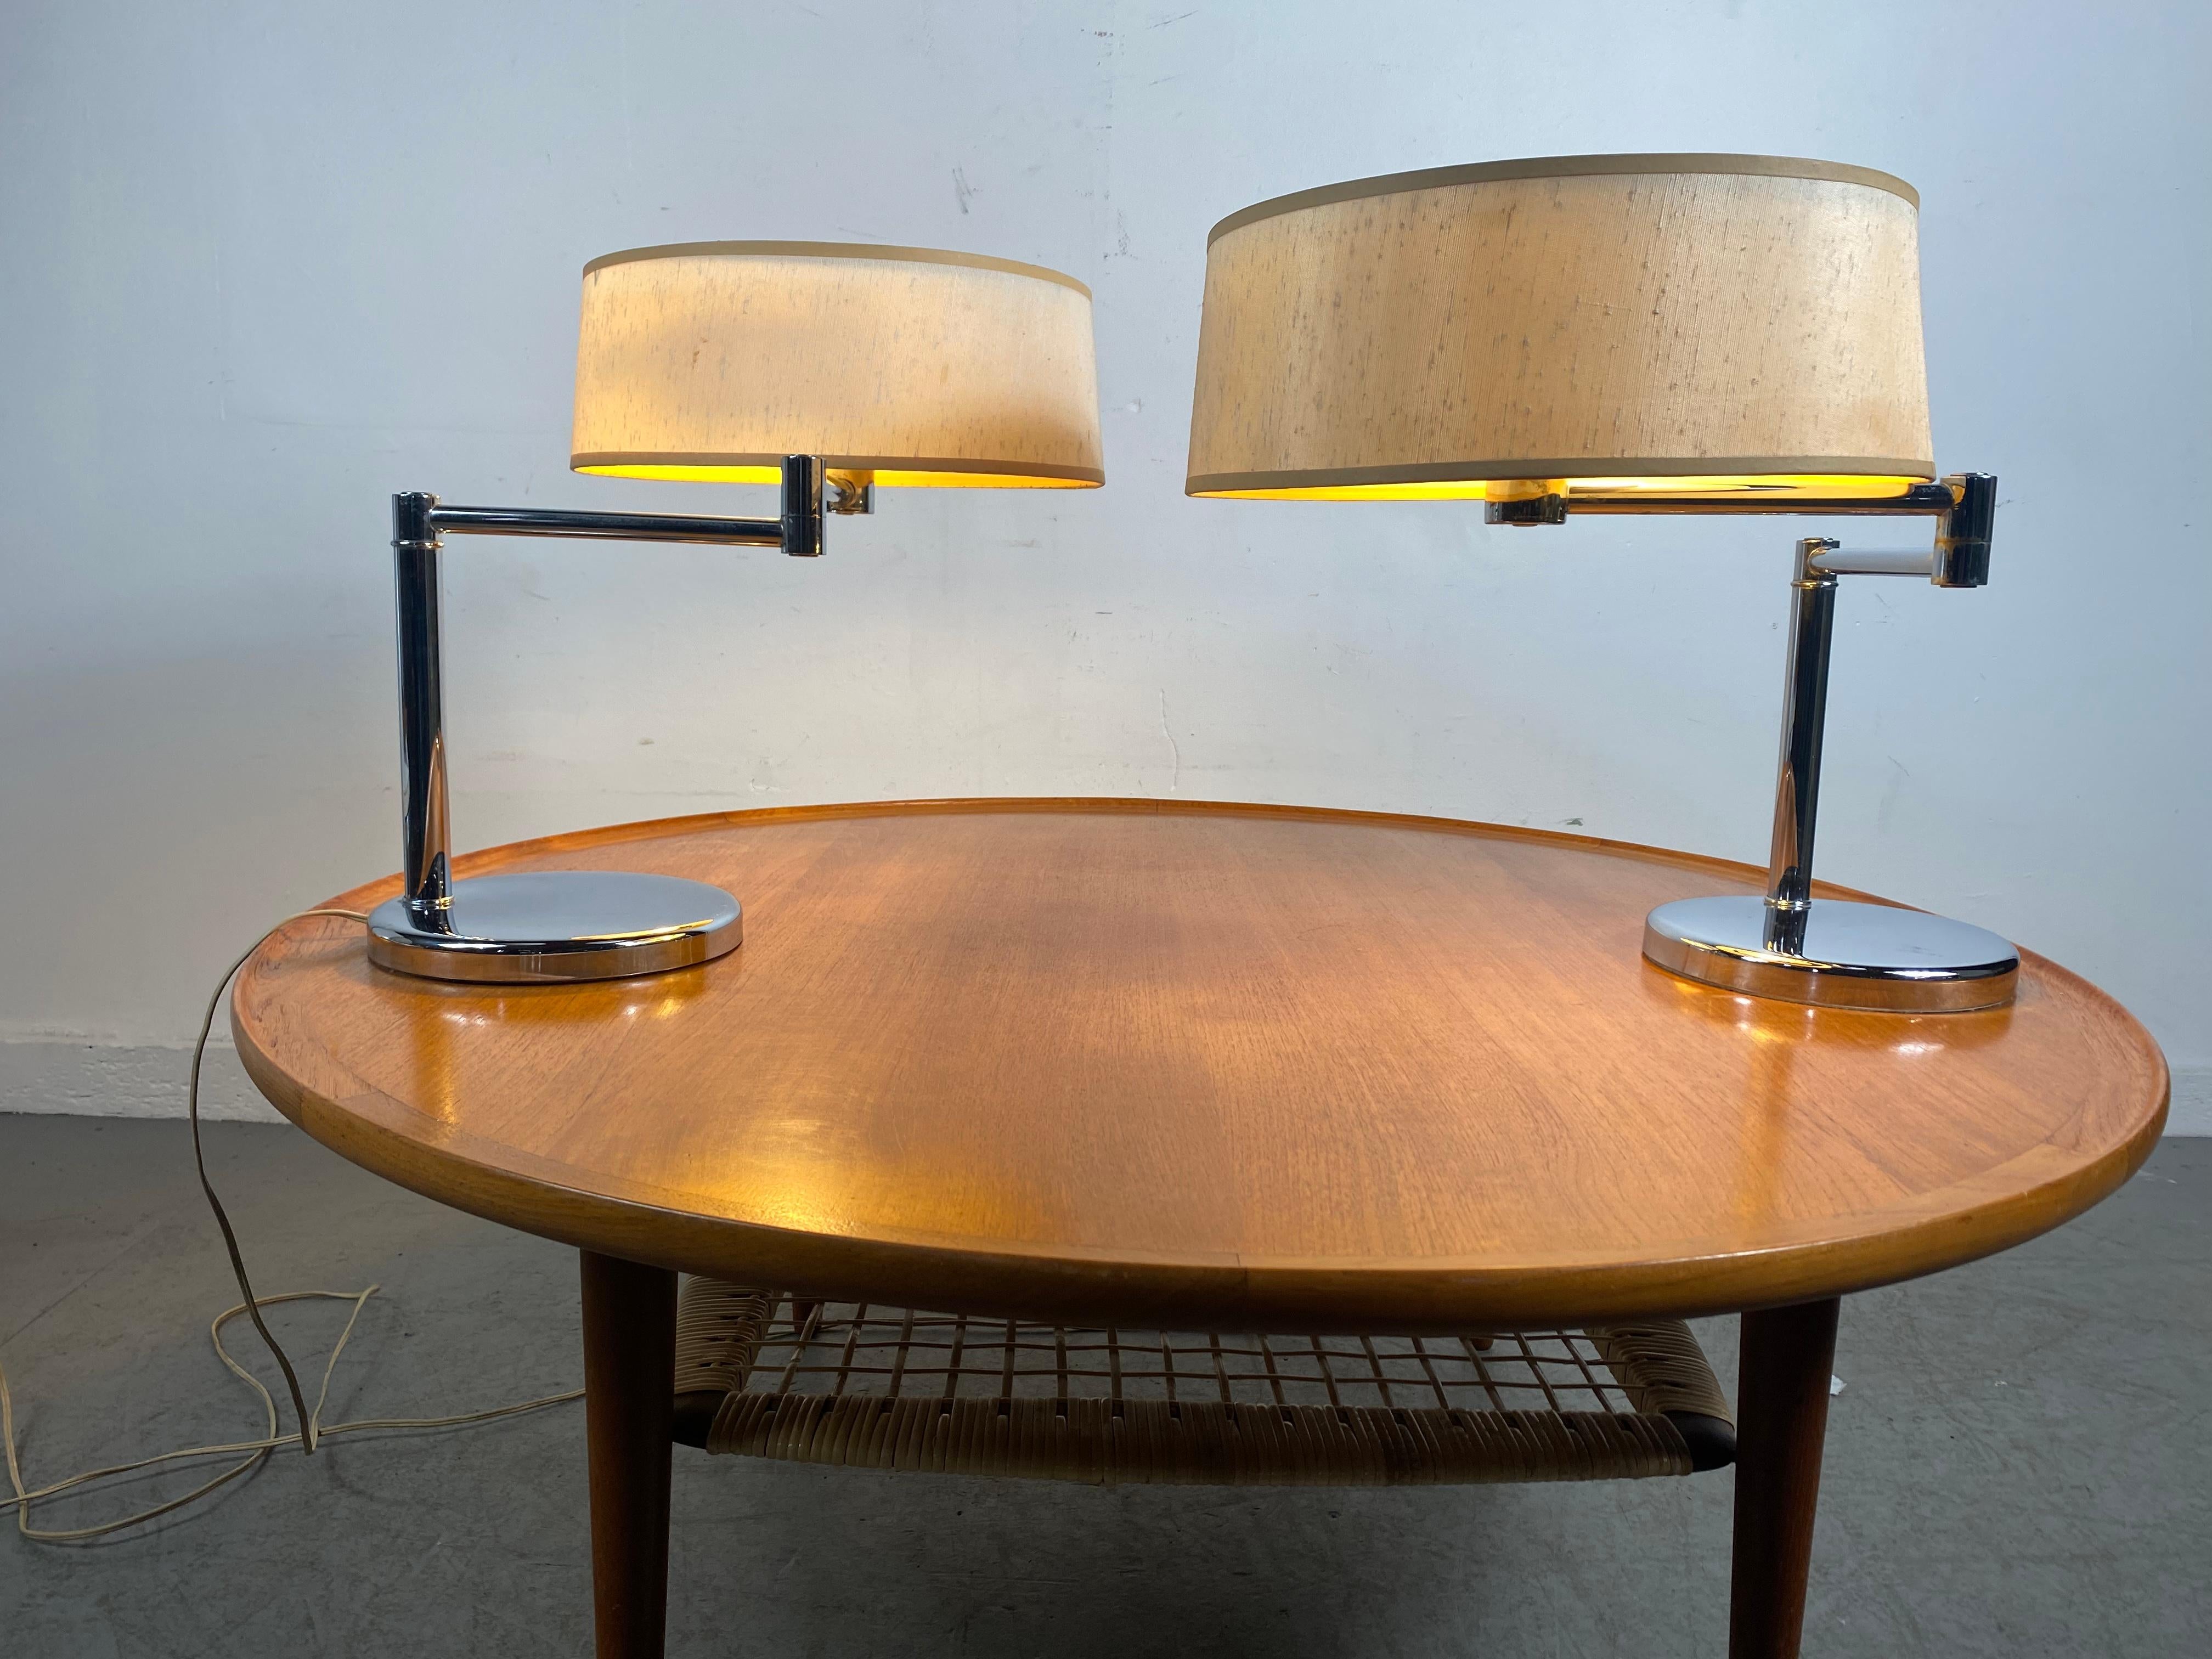 Matched Pair Walter Von Nessen Swing Out Table/ Desk Lamps, Nessen Studio's 2